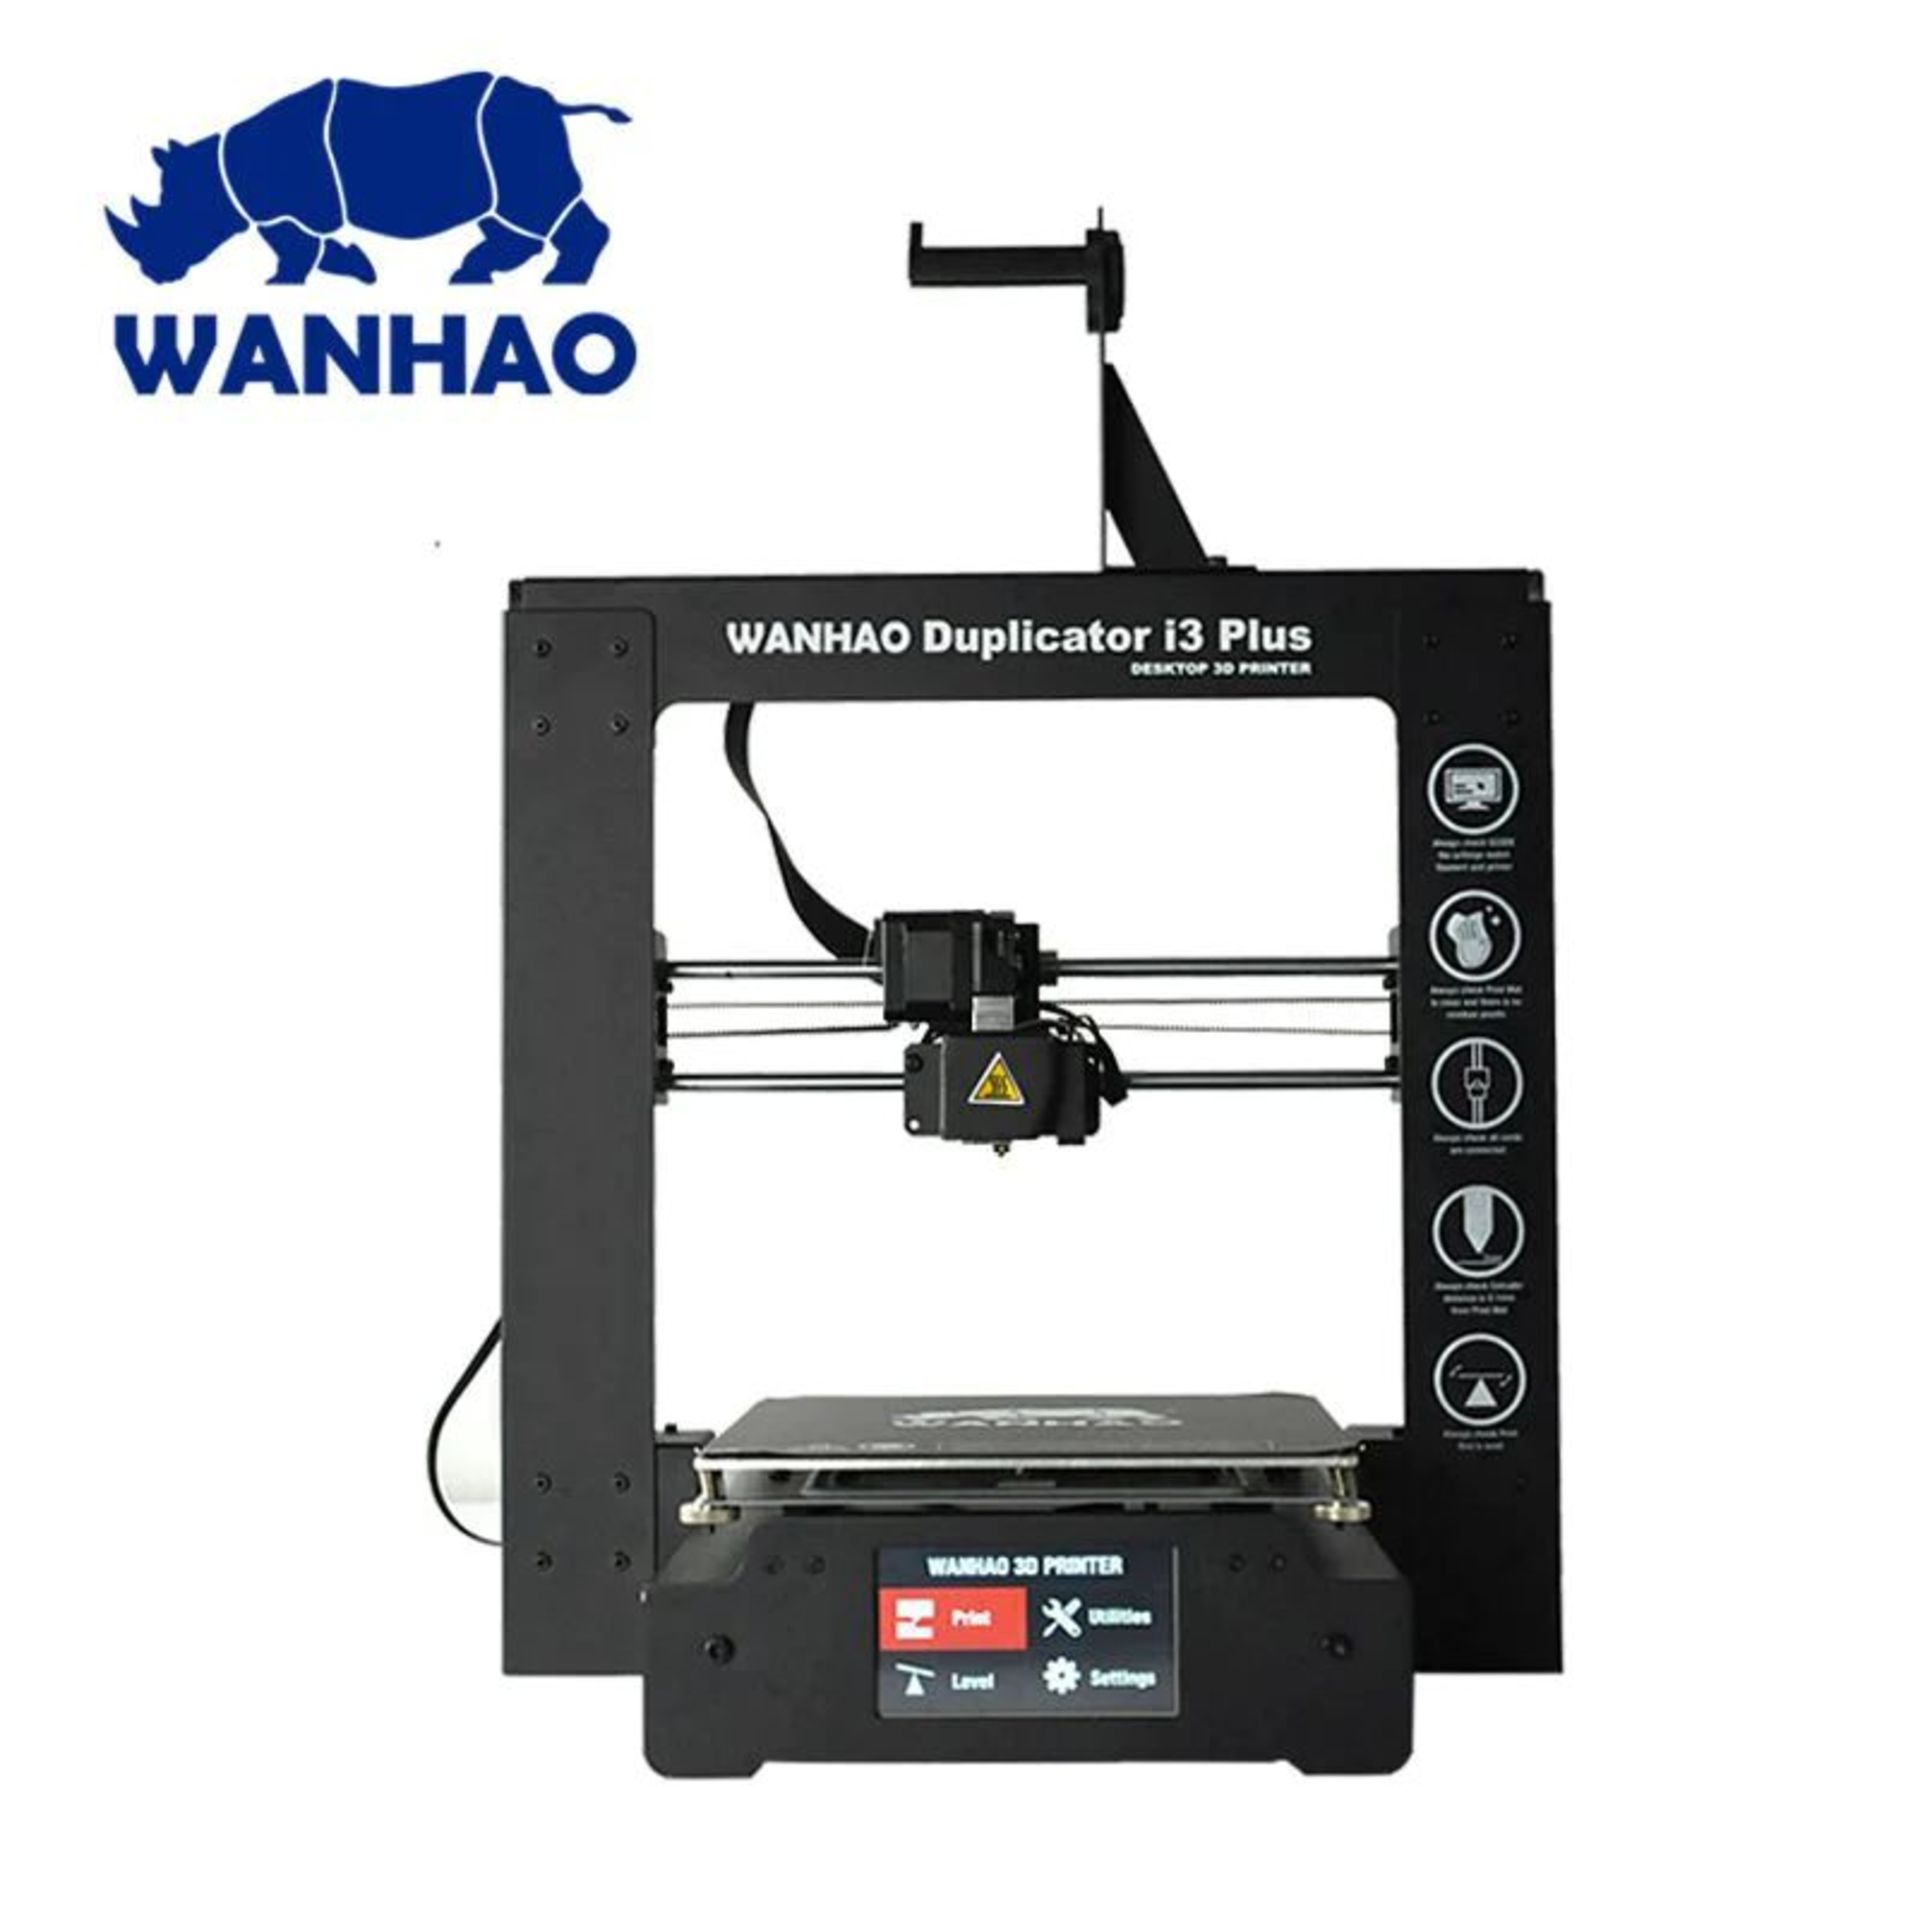 Wanhao Duplicator i3 PLUS V2 MK2 3D Printer. -RRP £359.99. ER21. - This PLUS model is the ultimate - Image 3 of 3